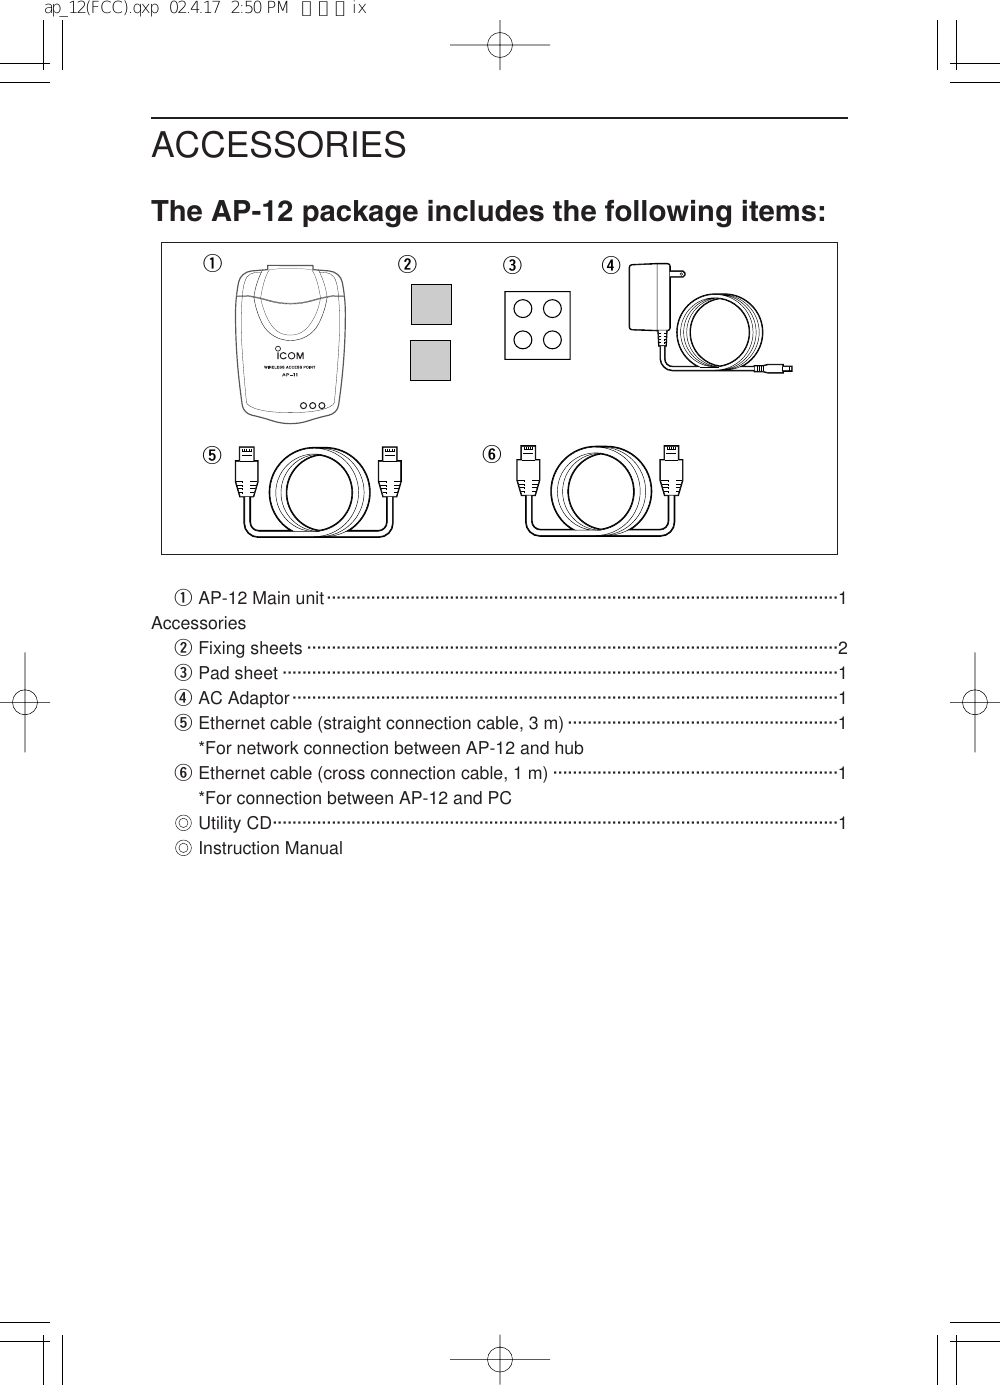 ACCESSORIESThe AP-12 package includes the following items:qAP-12 Main unit········································································································1AccessorieswFixing sheets ············································································································2ePad sheet ·················································································································1rAC Adaptor···············································································································1tEthernet cable (straight connection cable, 3 m) ·······················································1*For network connection between AP-12 and hubyEthernet cable (cross connection cable, 1 m) ··························································1*For connection between AP-12 and PC&quot;&quot;Utility CD···················································································································1&quot;&quot;Instruction Manualqrwtyeap_12(FCC).qxp  02.4.17  2:50 PM  ページix